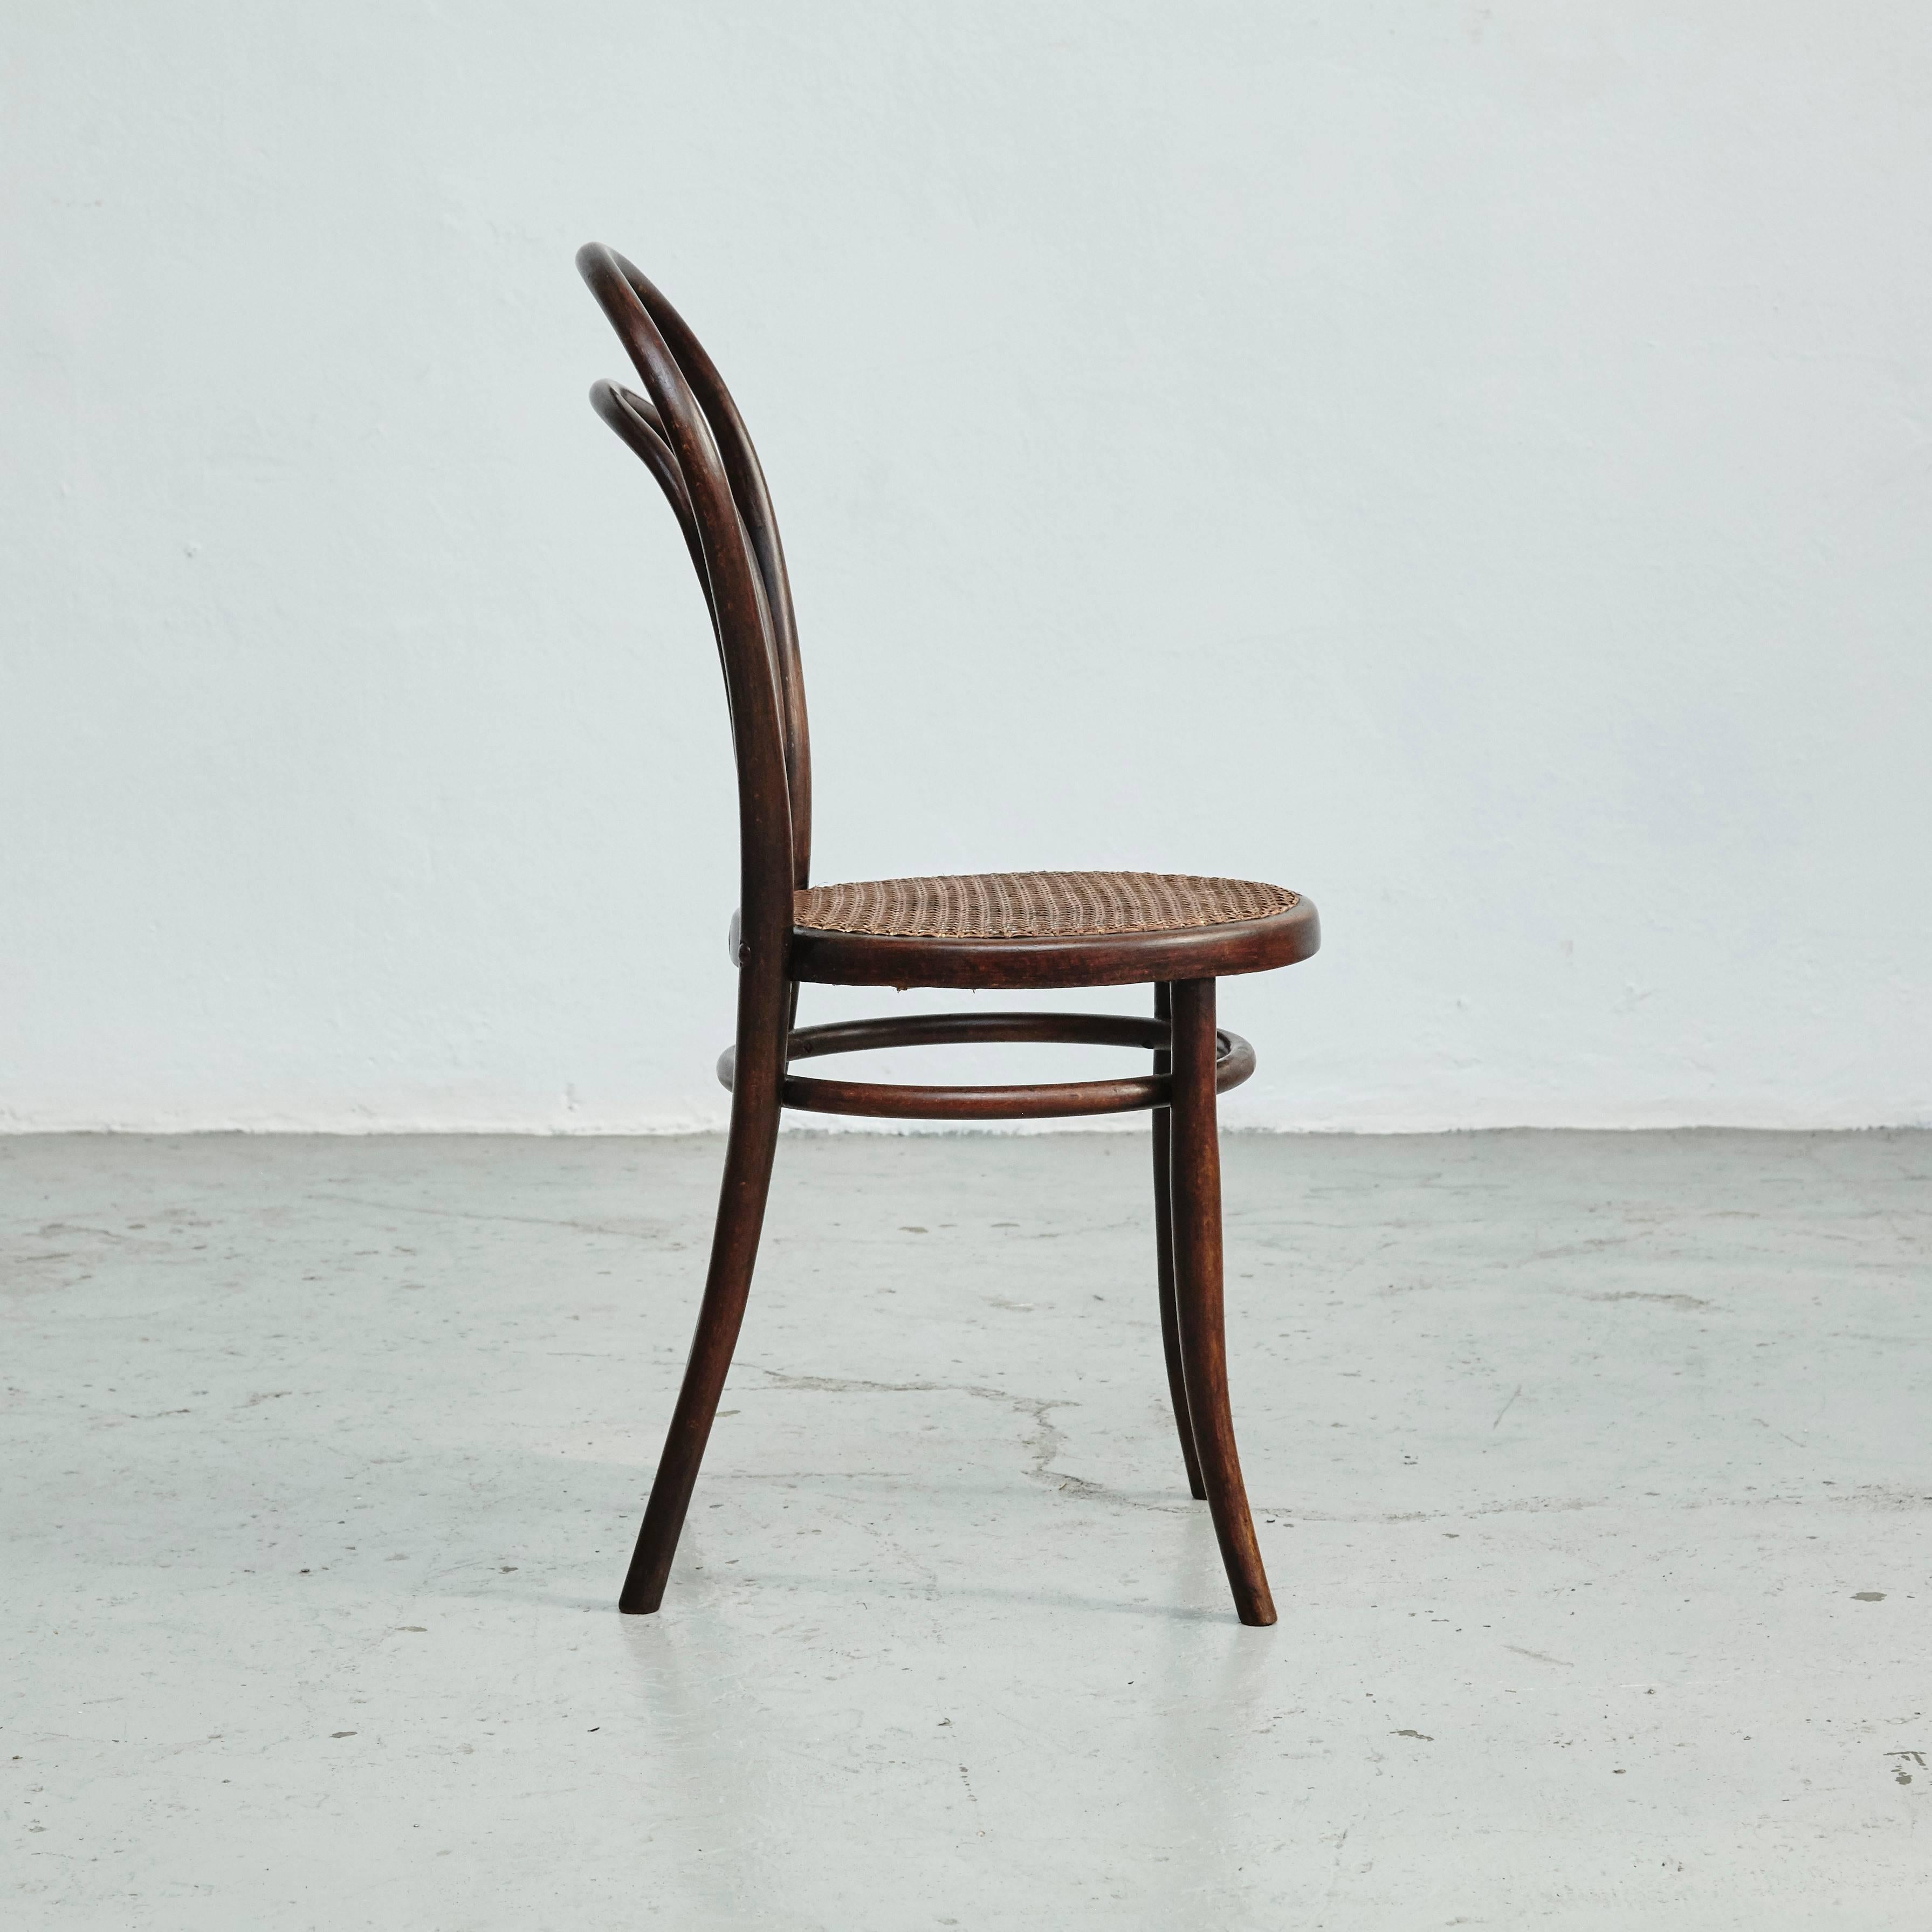 Other Pair of Chairs in the Style of Thonet by Unknown Designer, circa 1900